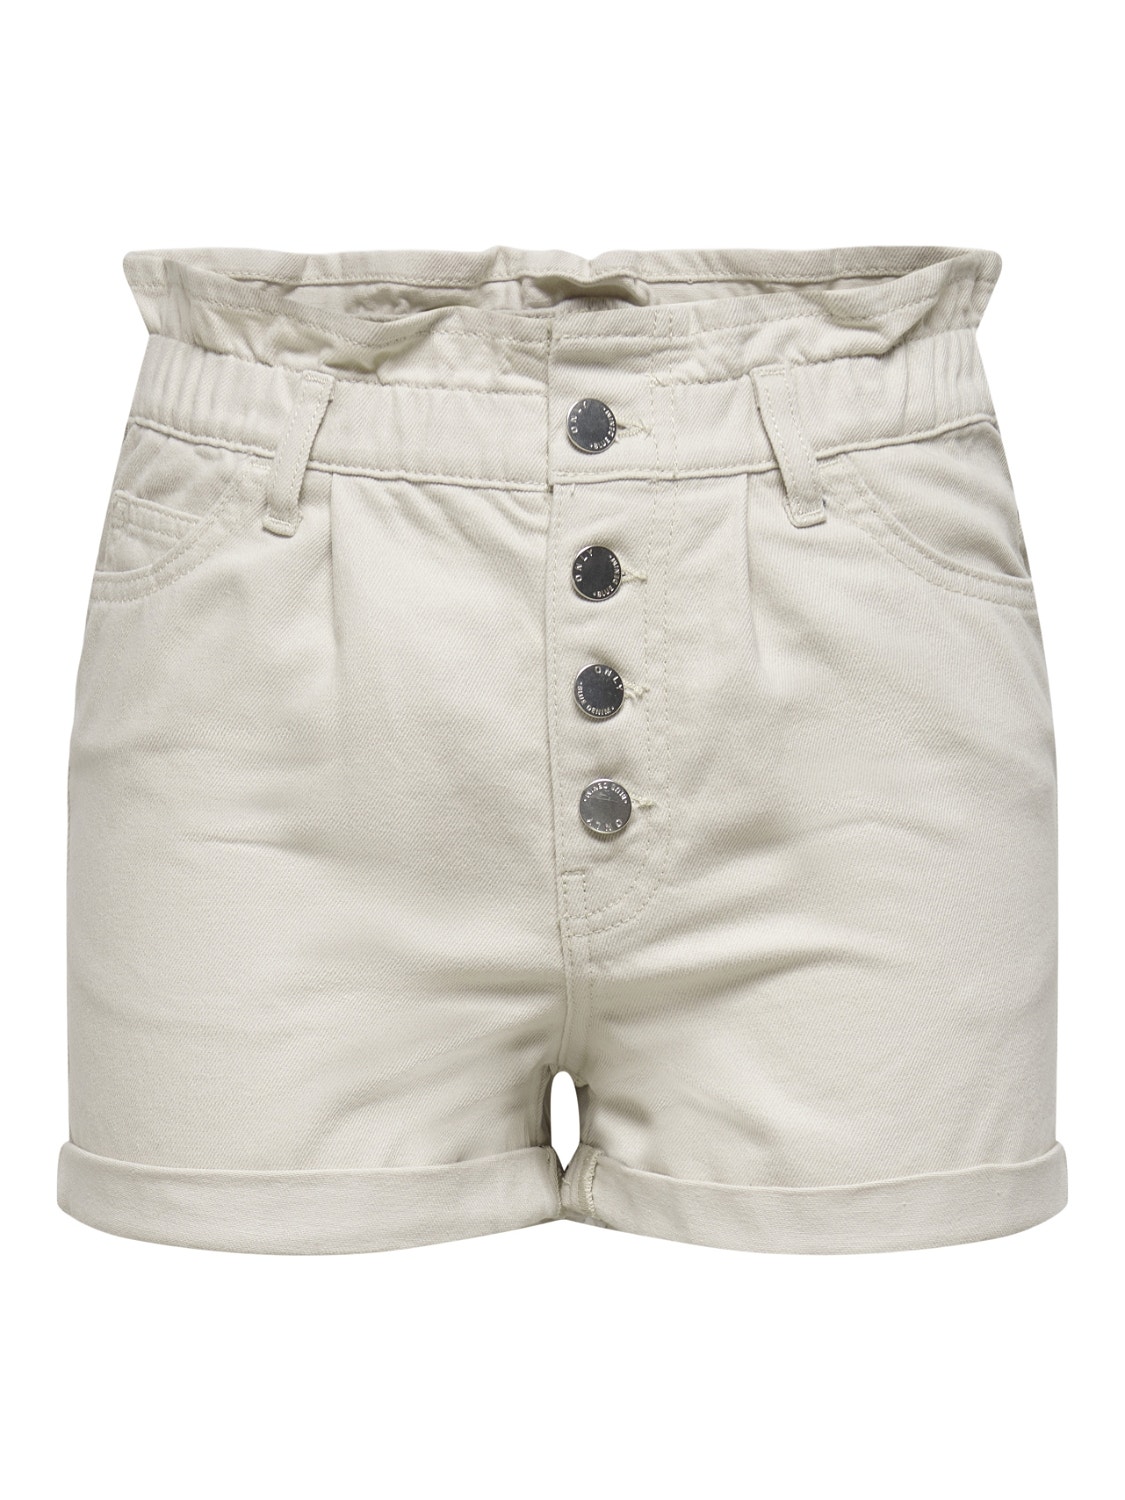 ONLY Shorts Baggy Fit Ourlets repliés -Moonbeam - 15230253